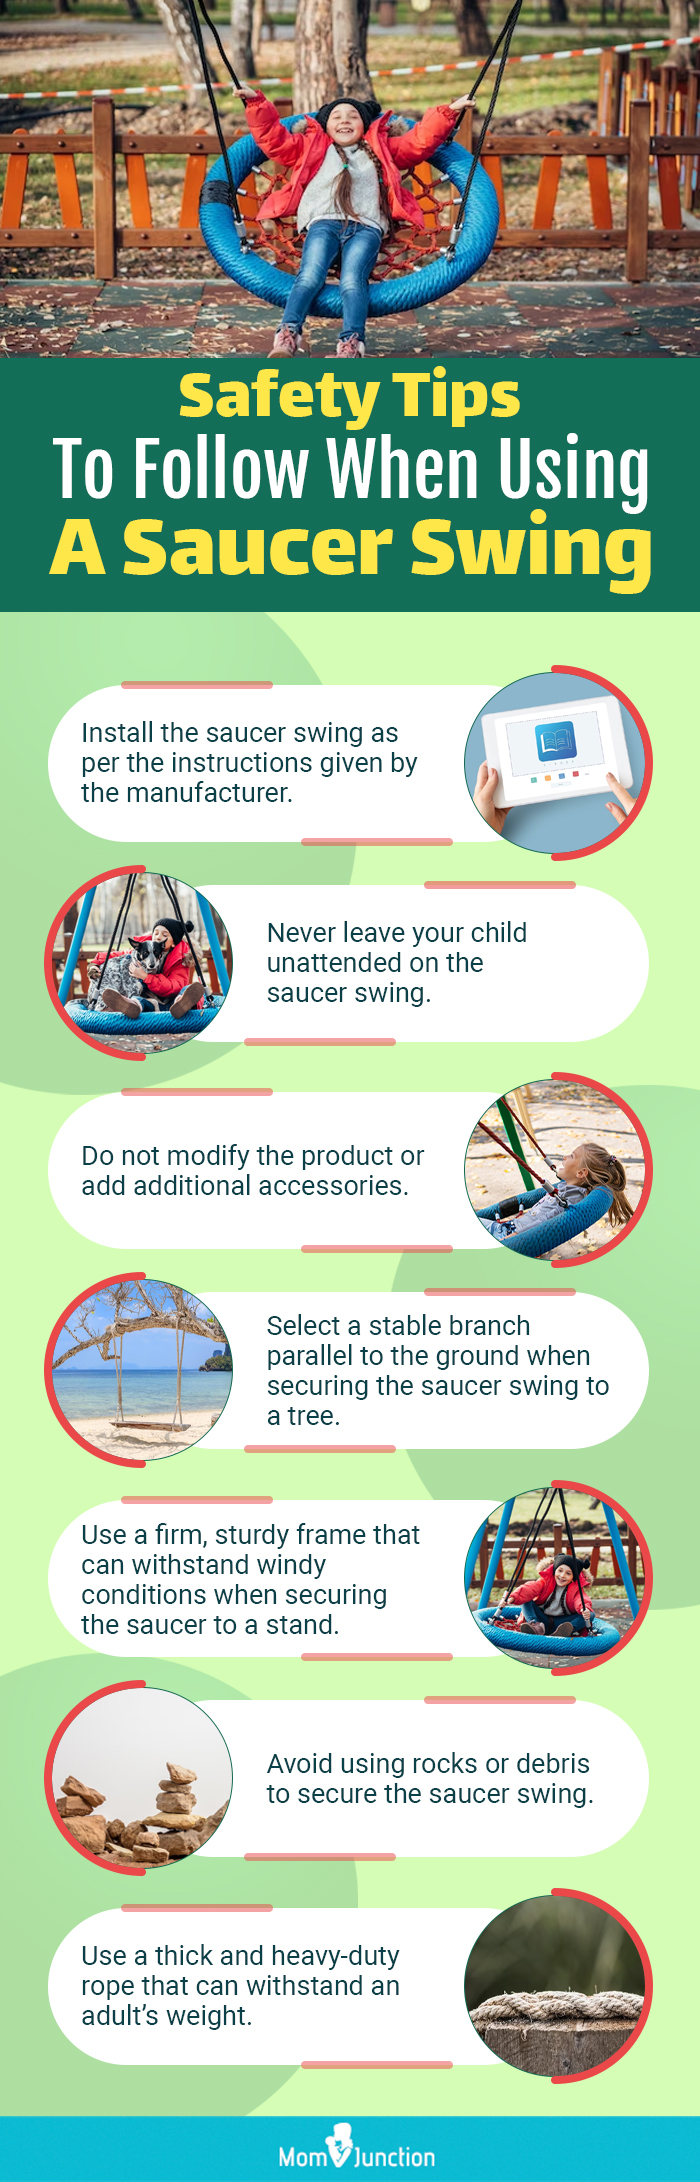 Safety Tips To Follow When Using A Saucer Swing (infographic)